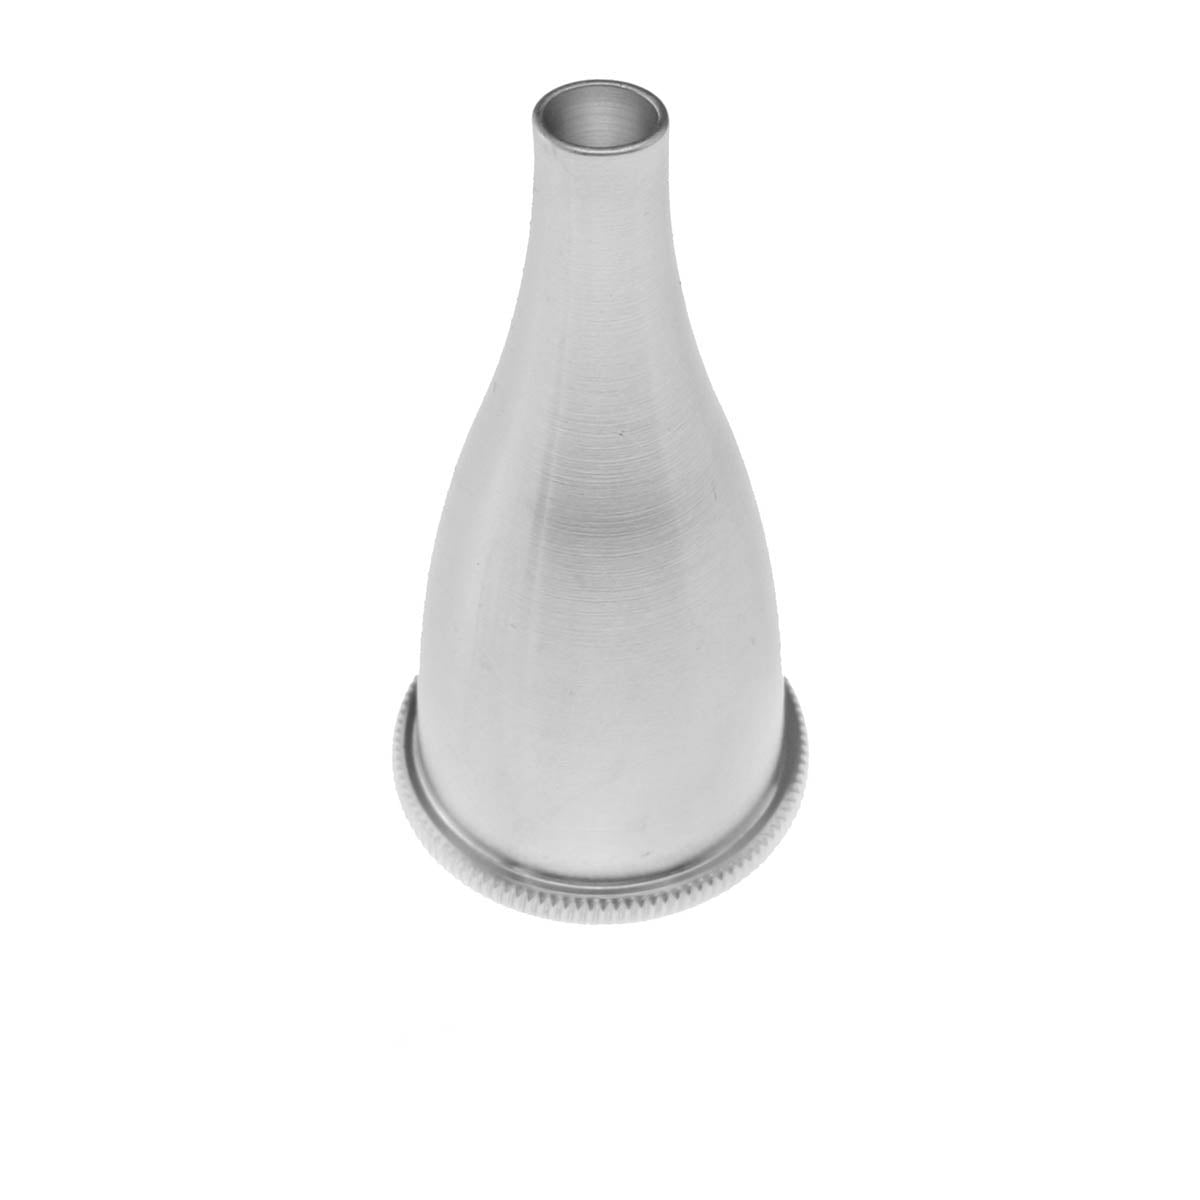 Gruber Speculum 41mm lngth 4x4mm oval end infant